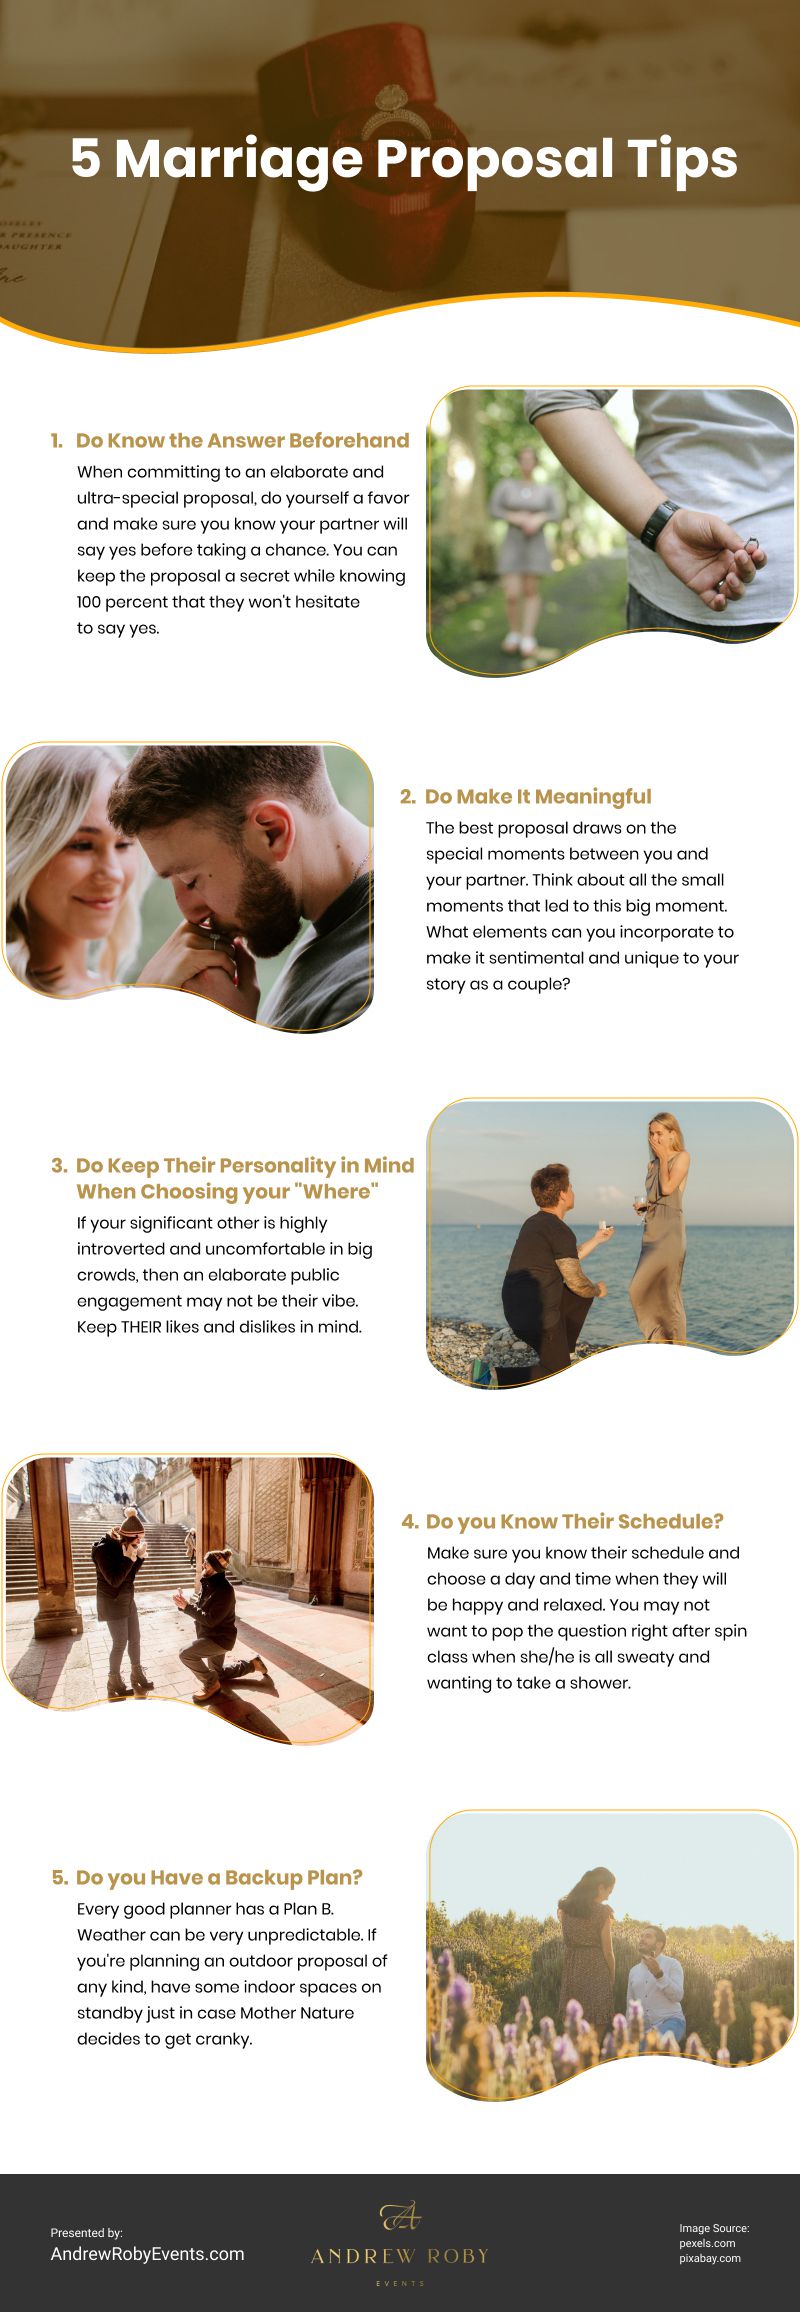 5 Marriage Proposal Tips Infographic